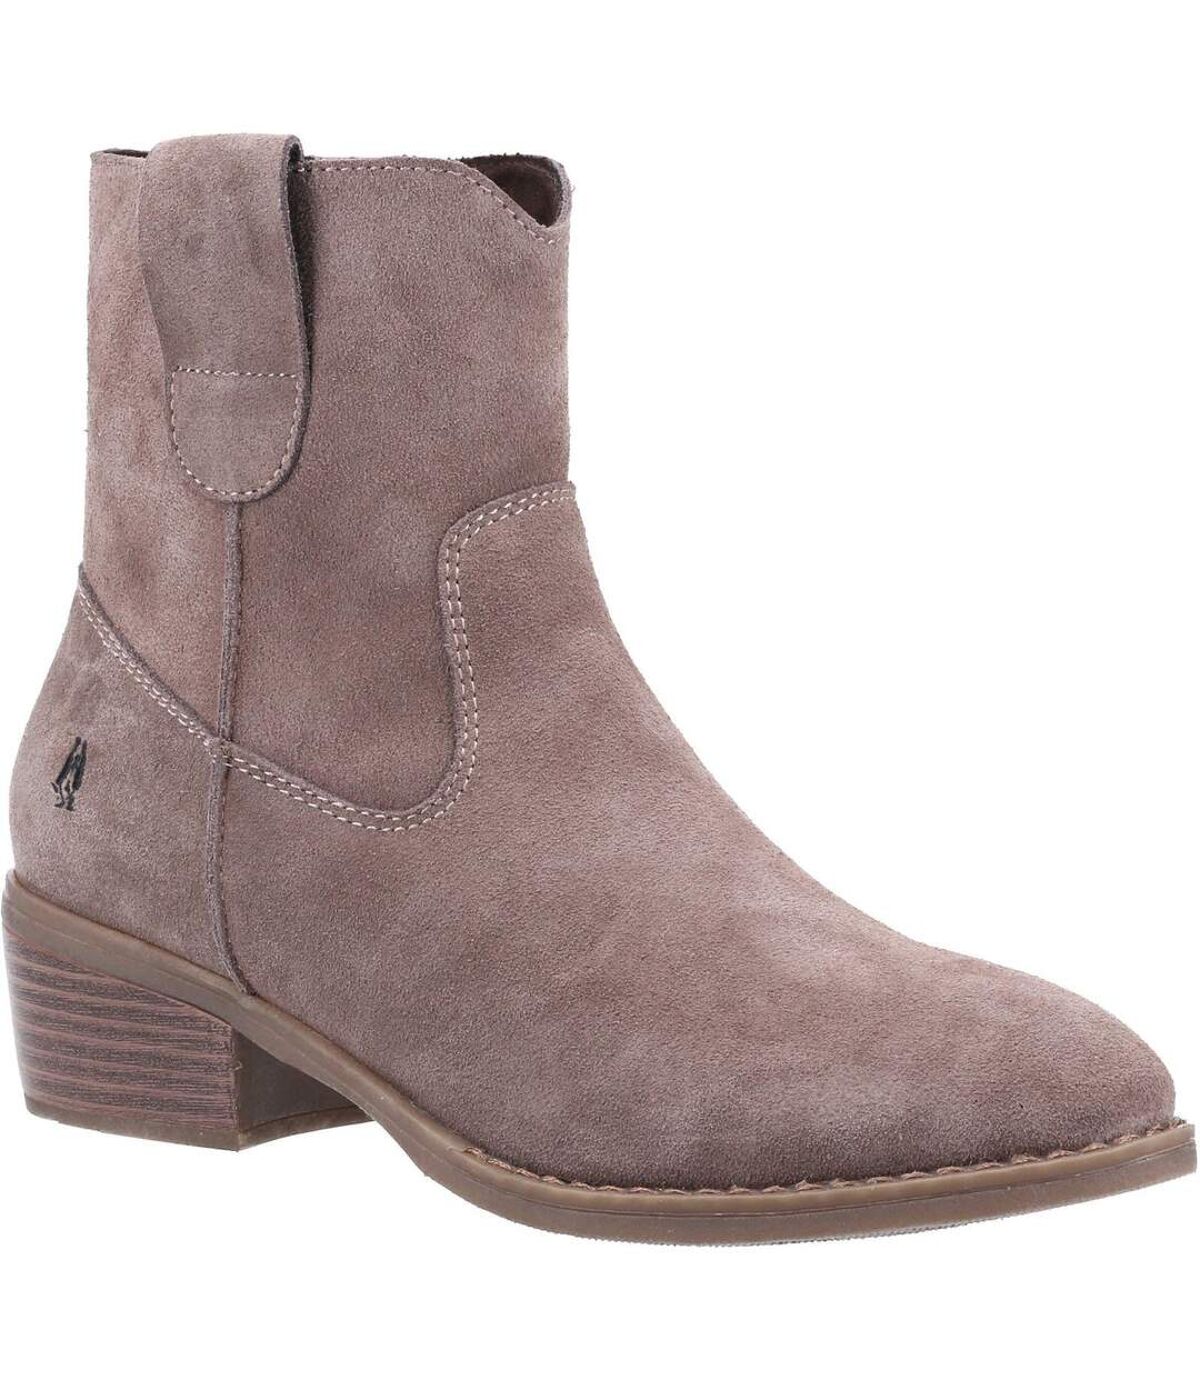 Hush Puppies Womens/Ladies Iva Suede Ankle Boots (Taupe) - UTFS7559